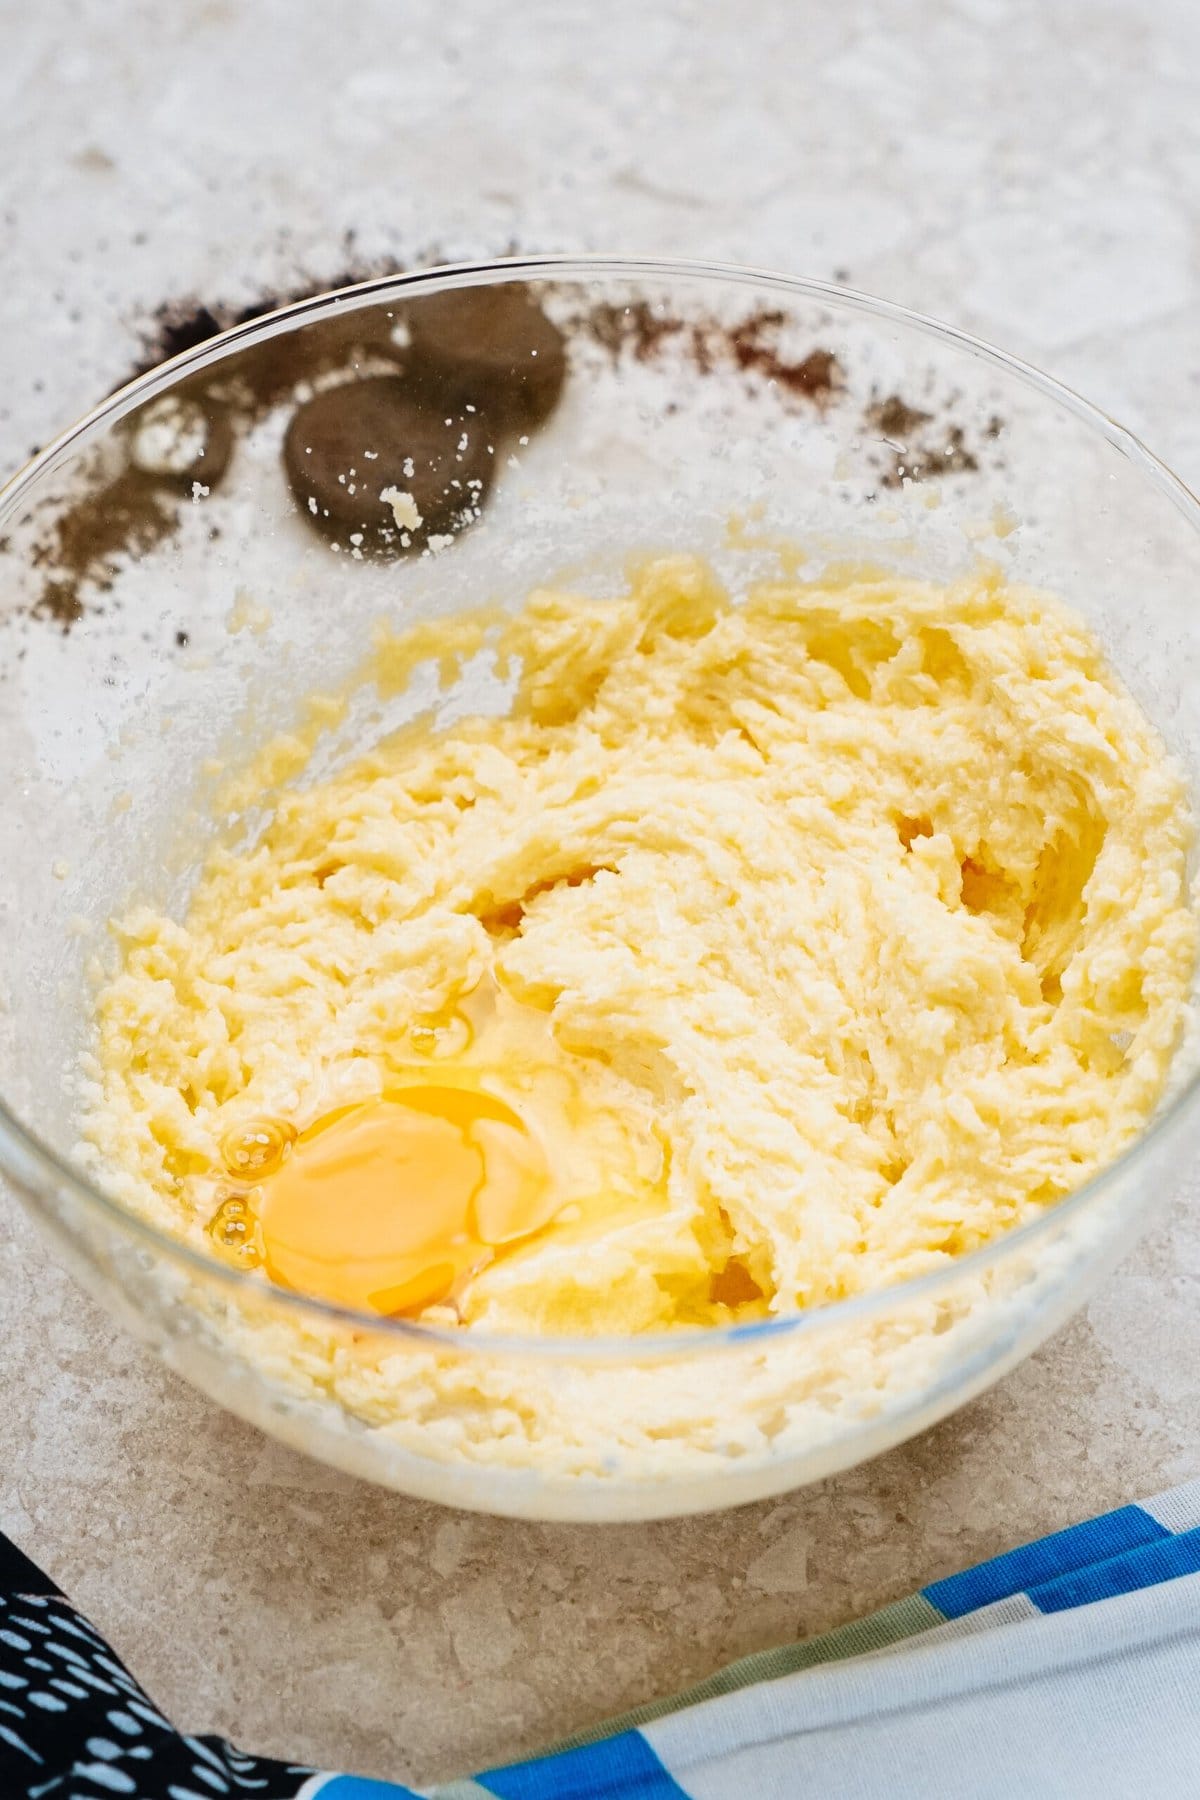 A glass bowl on a countertop containing creamed butter and sugar with an egg cracked in the center, ready to be mixed.